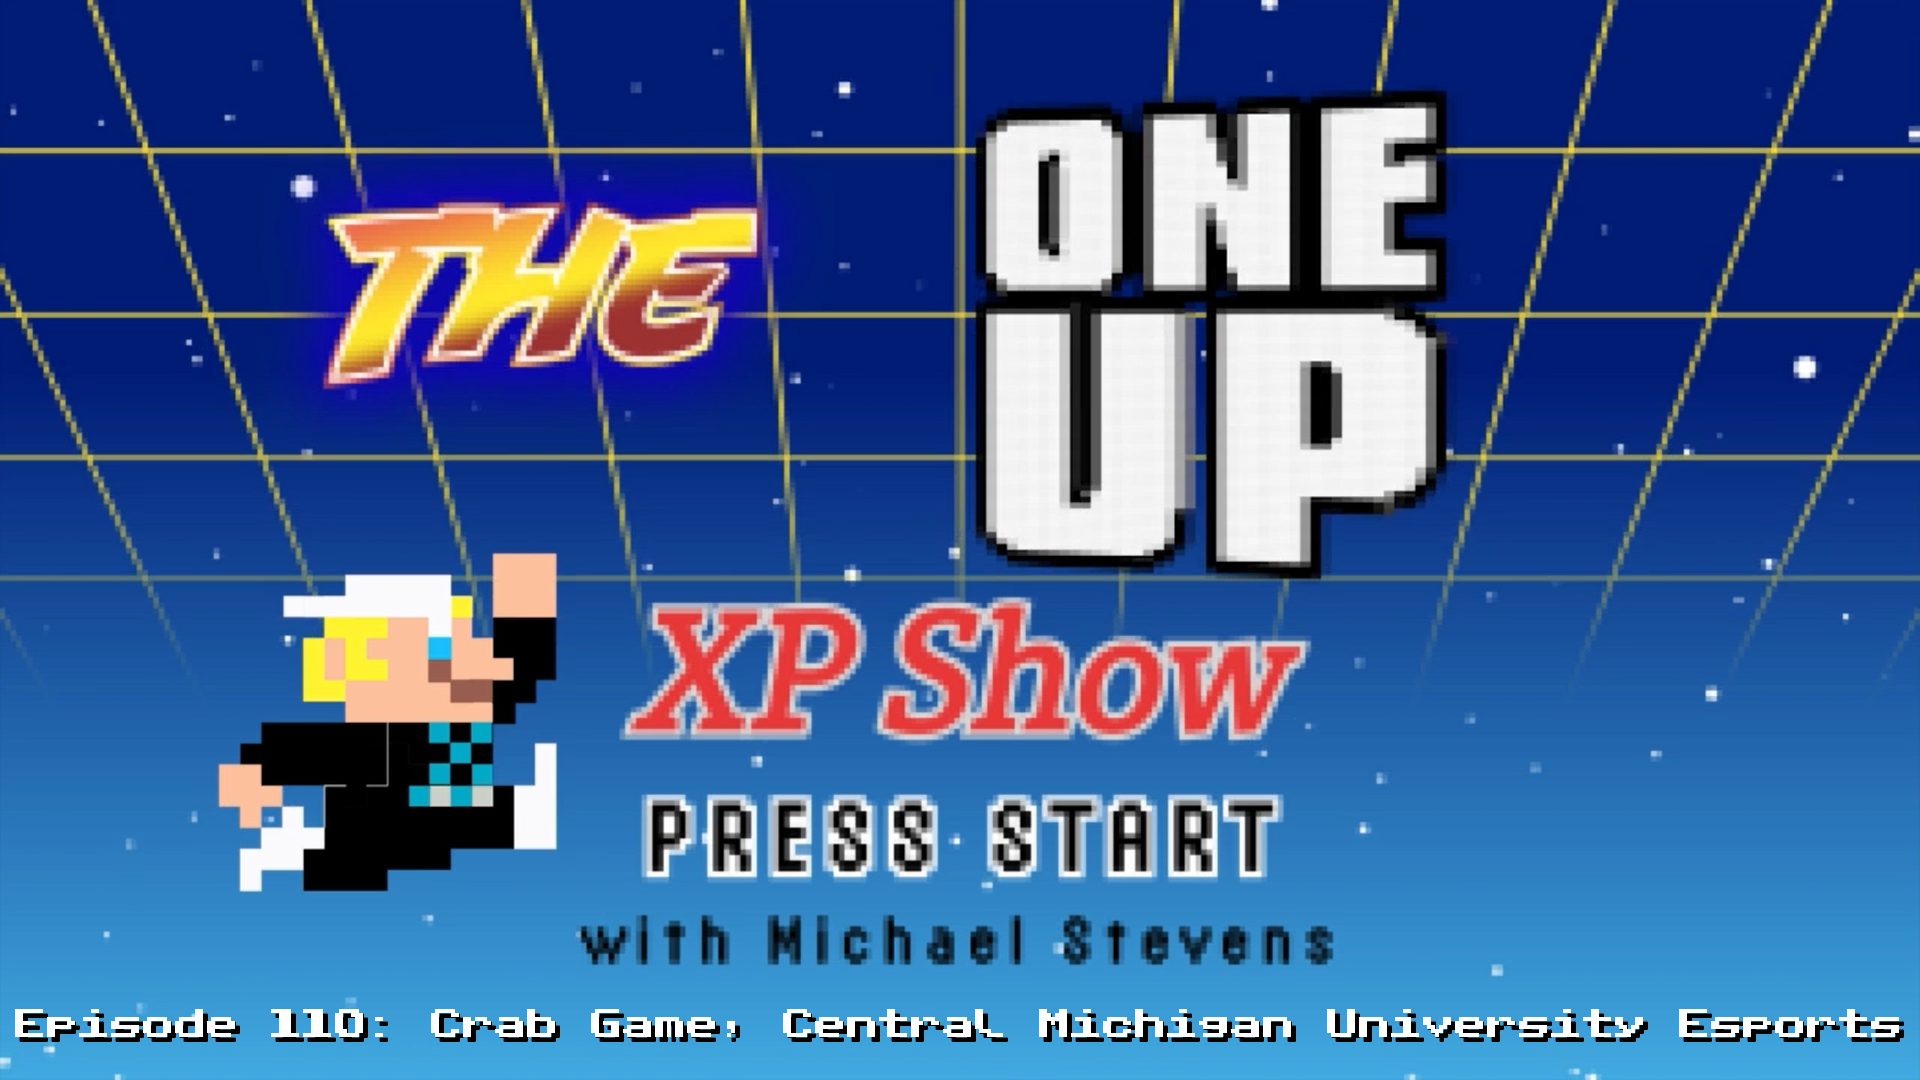 The One Up XP Show - Episode 110: Crab Game, Central Michigan University Esports